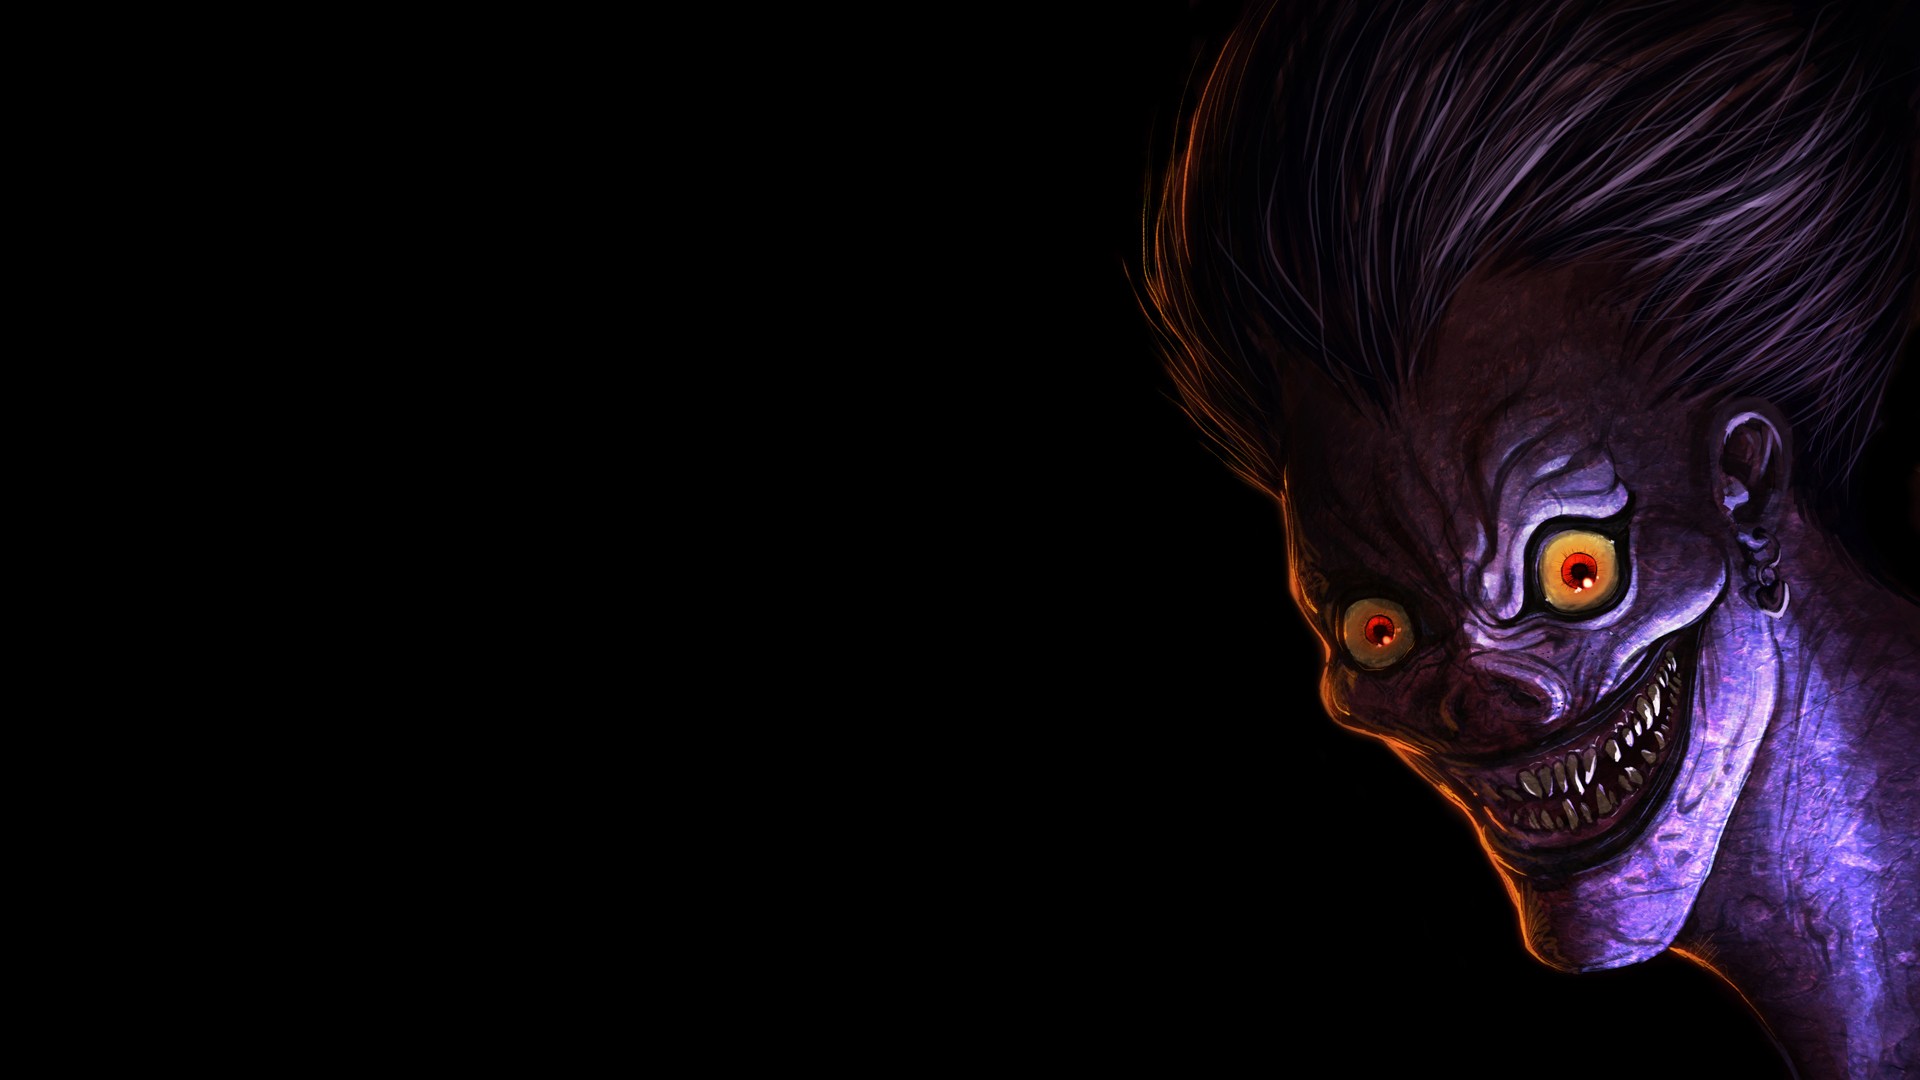 Death Note Ryuk Anime Smiling Happy Face Red Eyes Looking At Viewer Artwork Black Background Purple 1920x1080